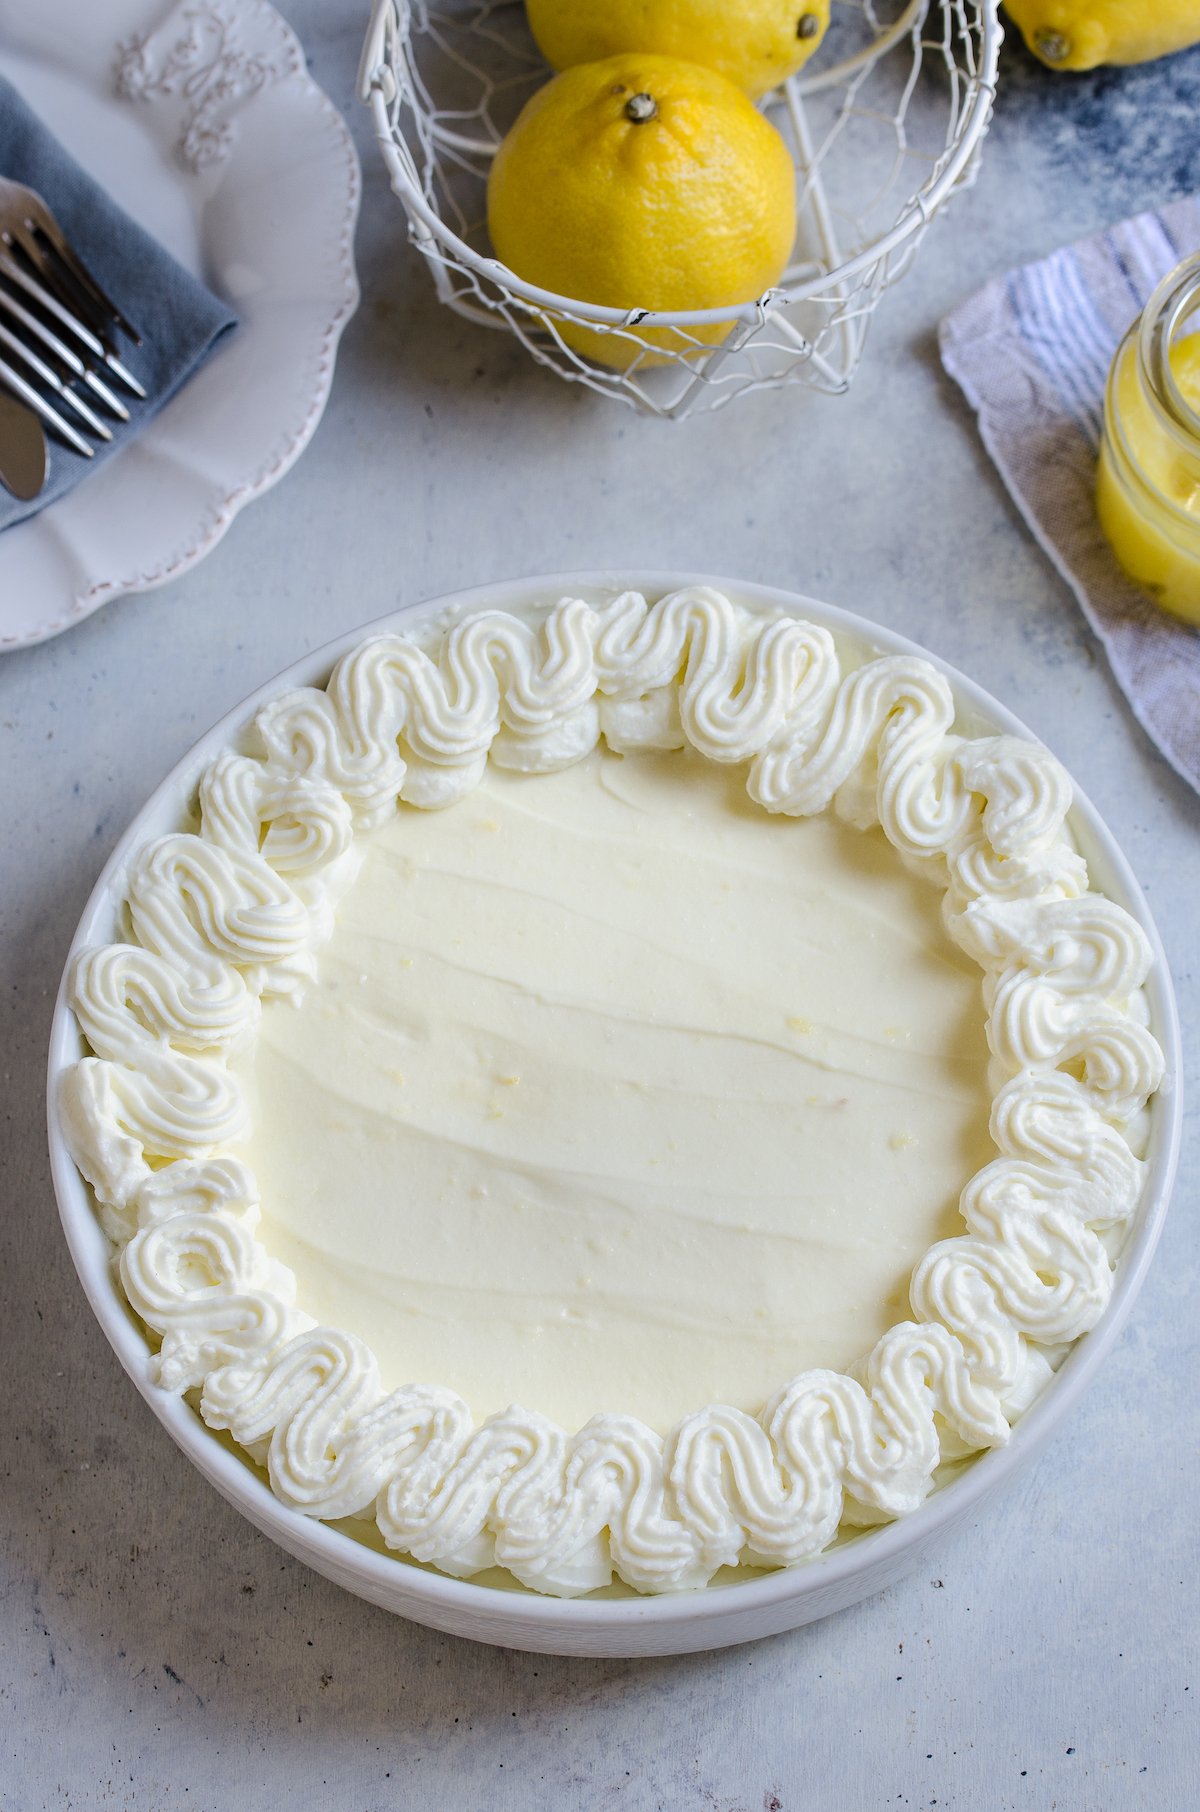 A pan of lemon pie with whipped cream.